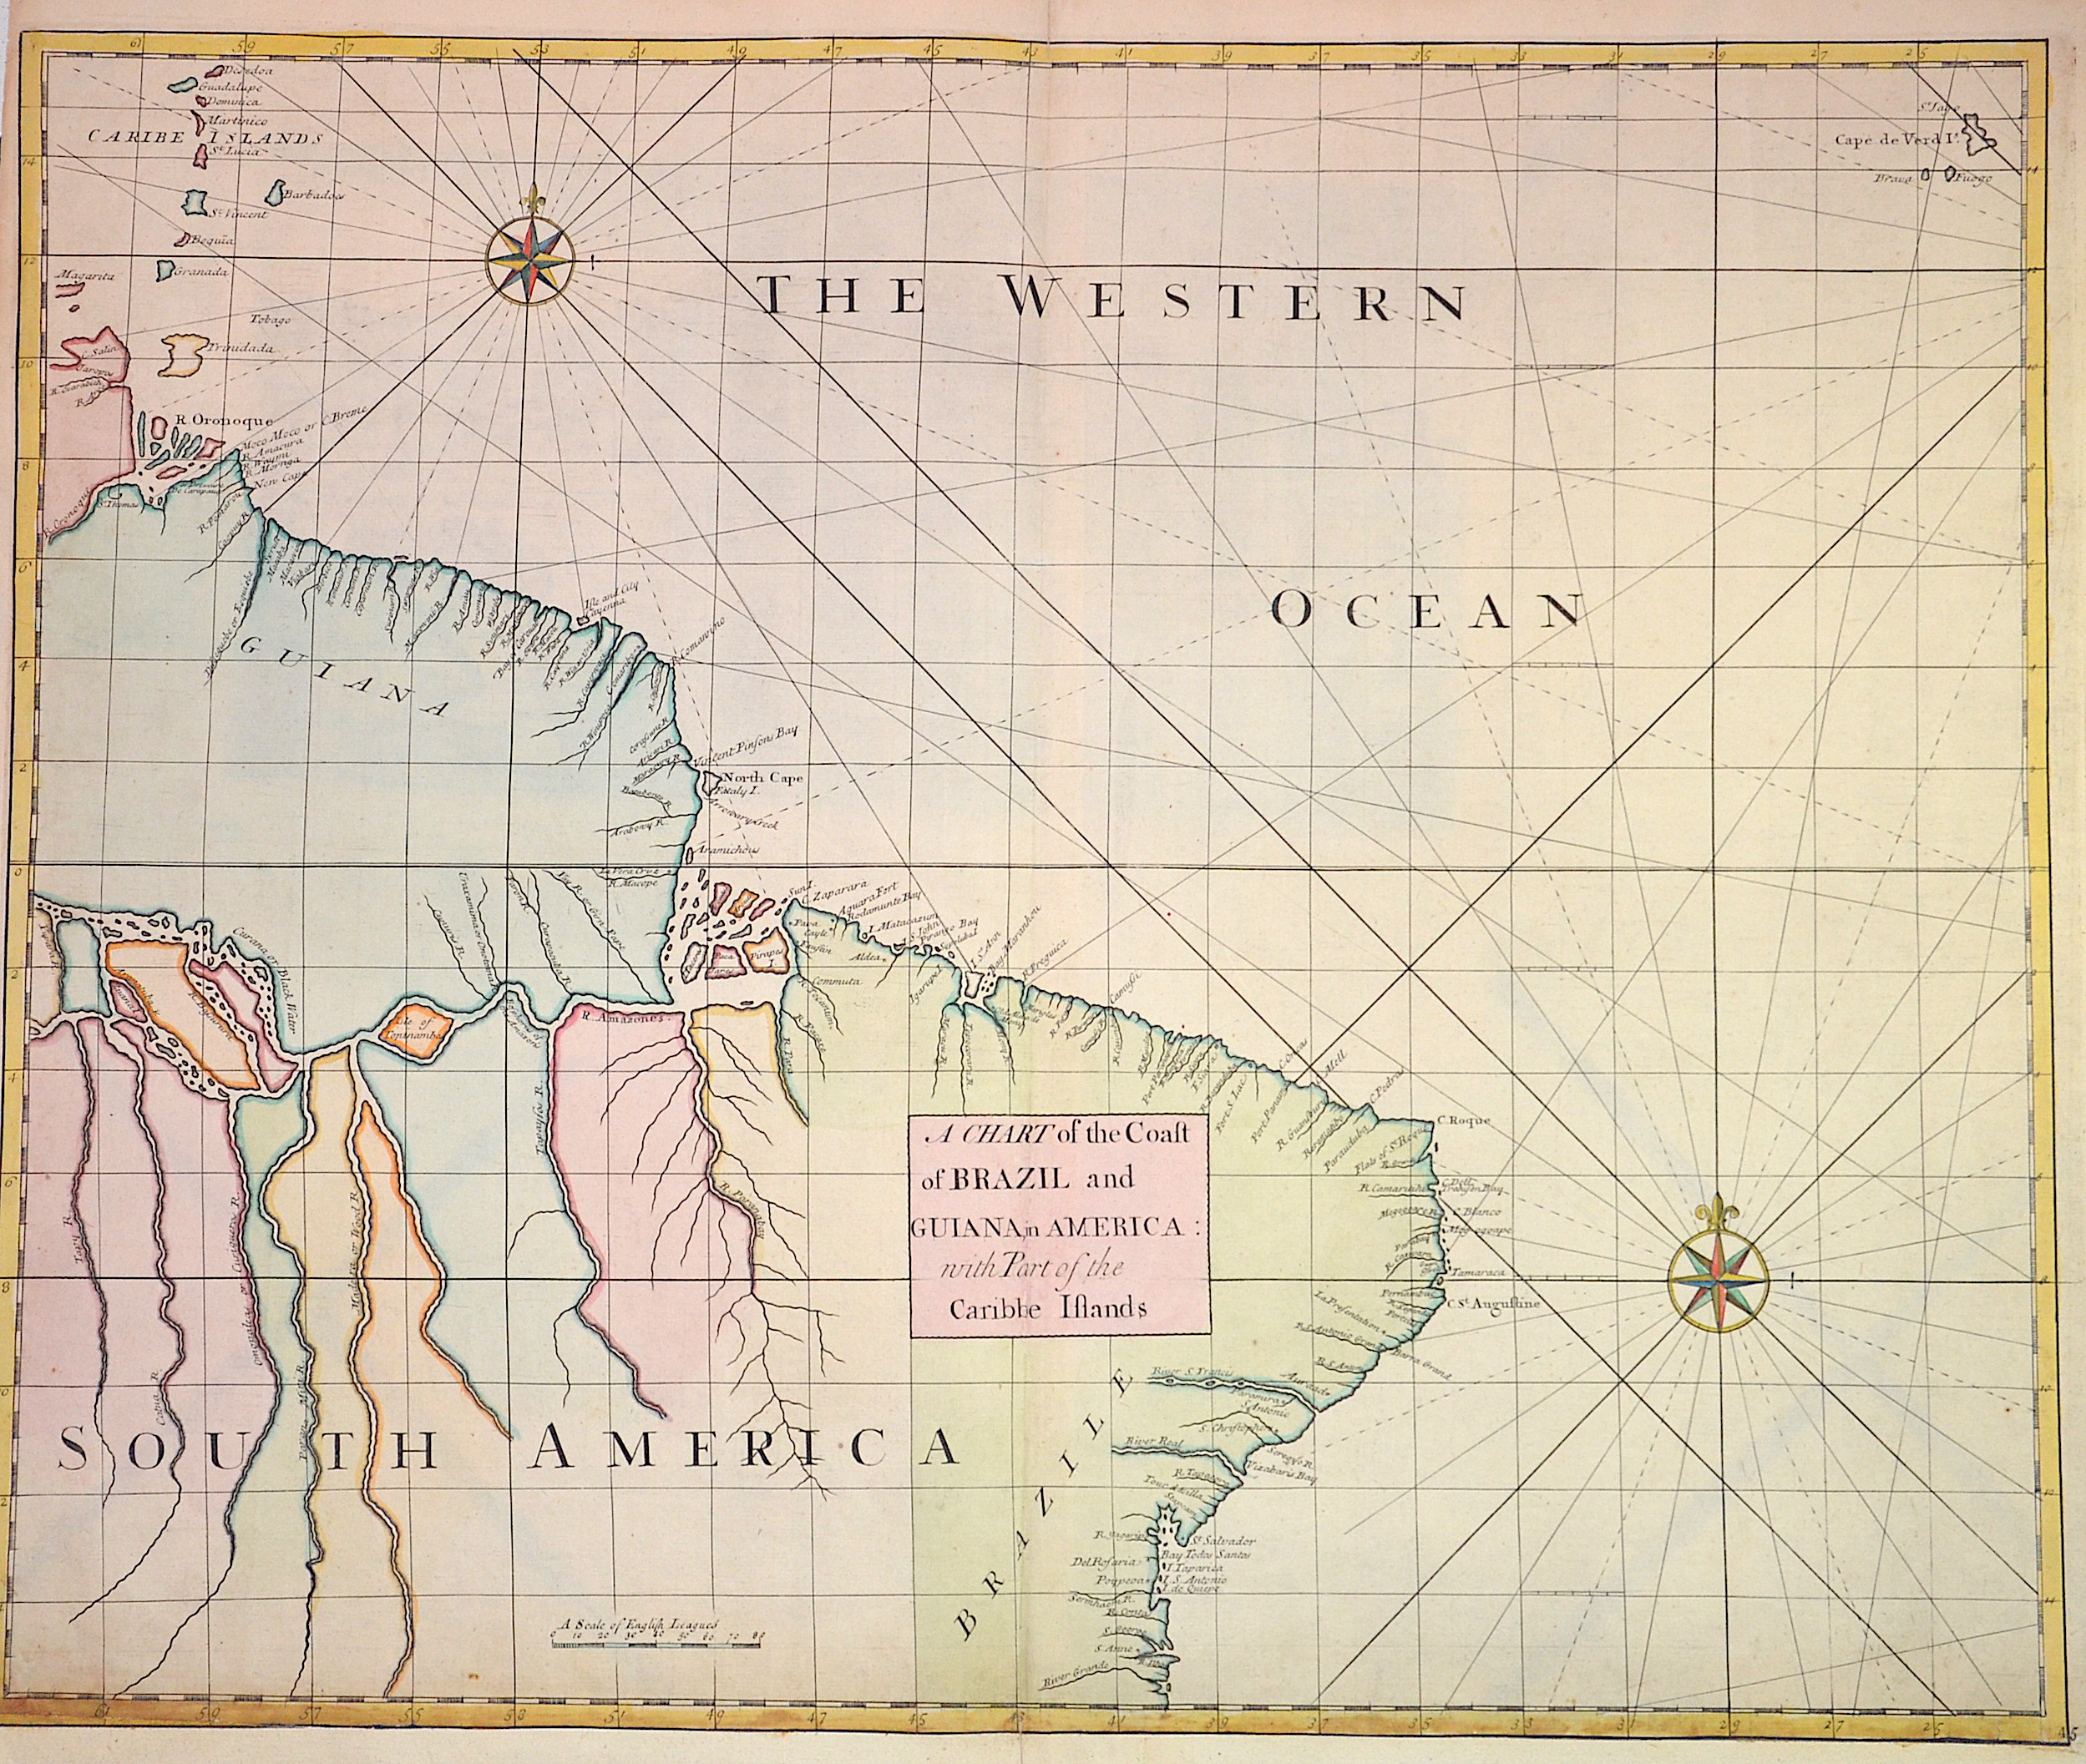 Senex  A chart of the coast of Brazil and Guiana in America with part of the Caribbe Islands